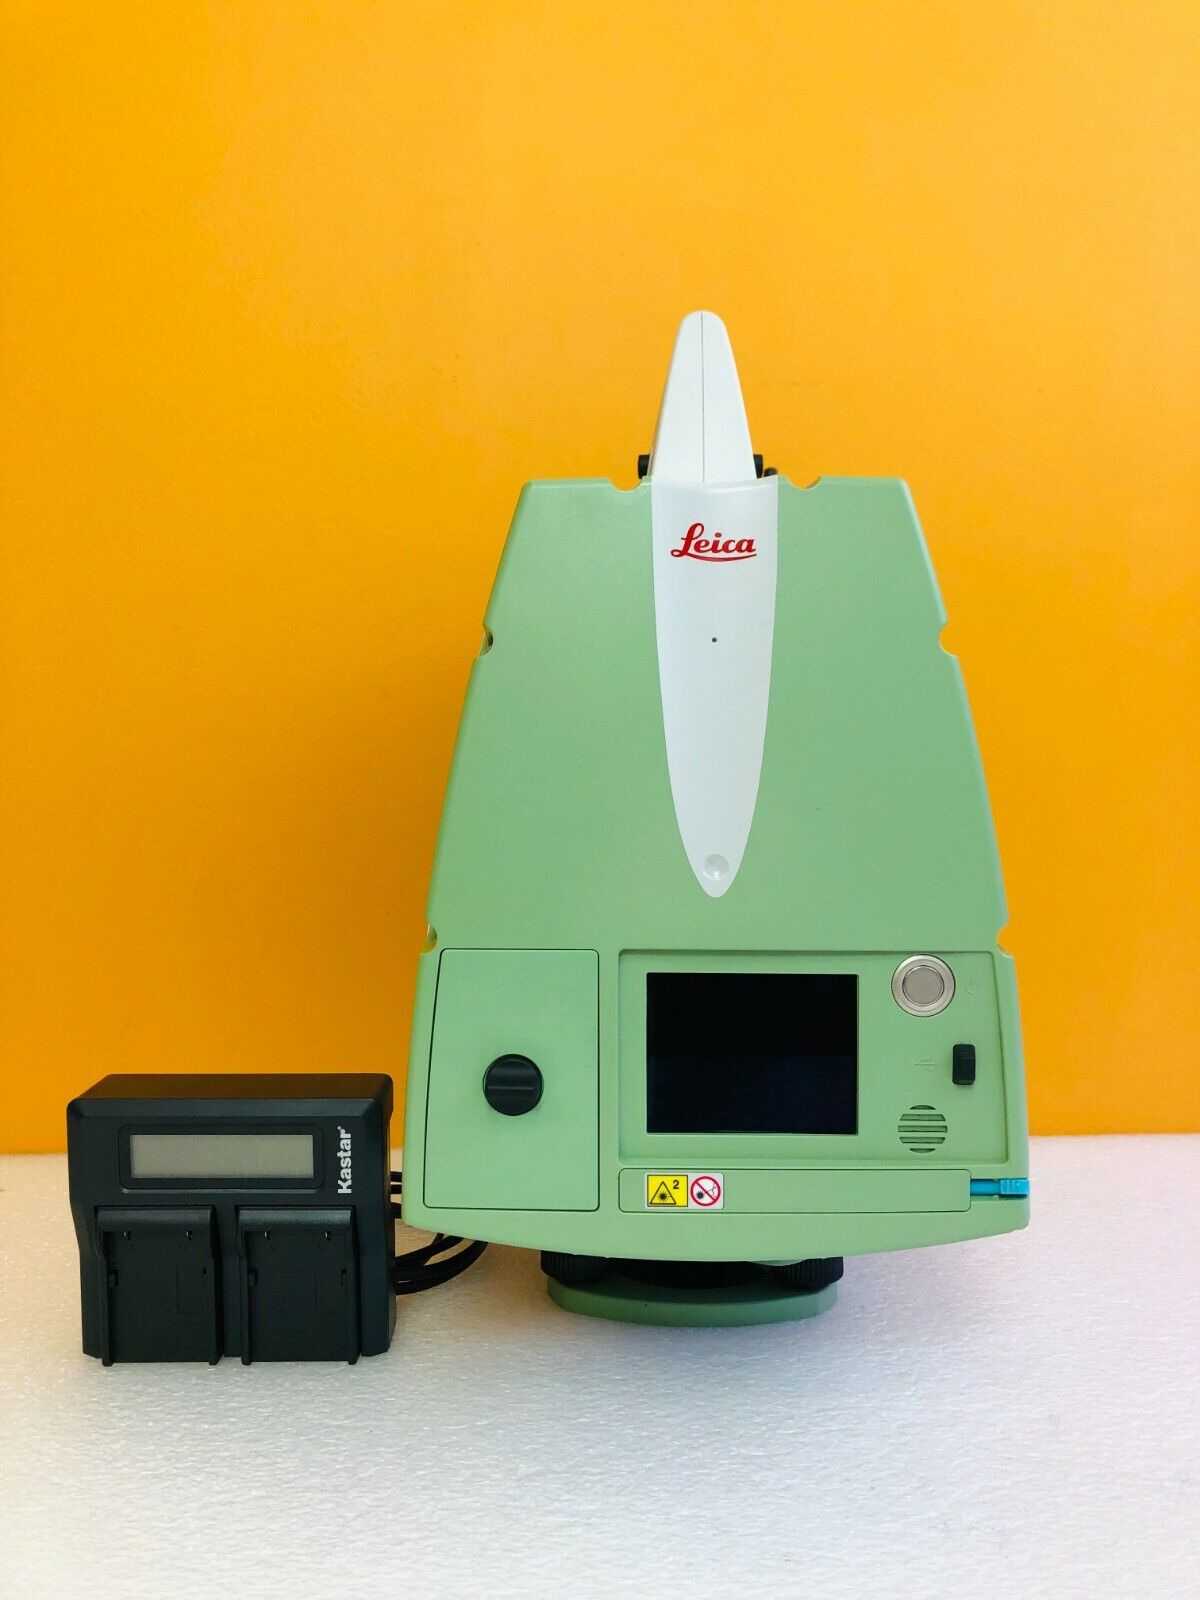 Leica Scanstation P20 1,000,000 Points/Sec, Ultra-High Speed 3D Scanner, Tested!